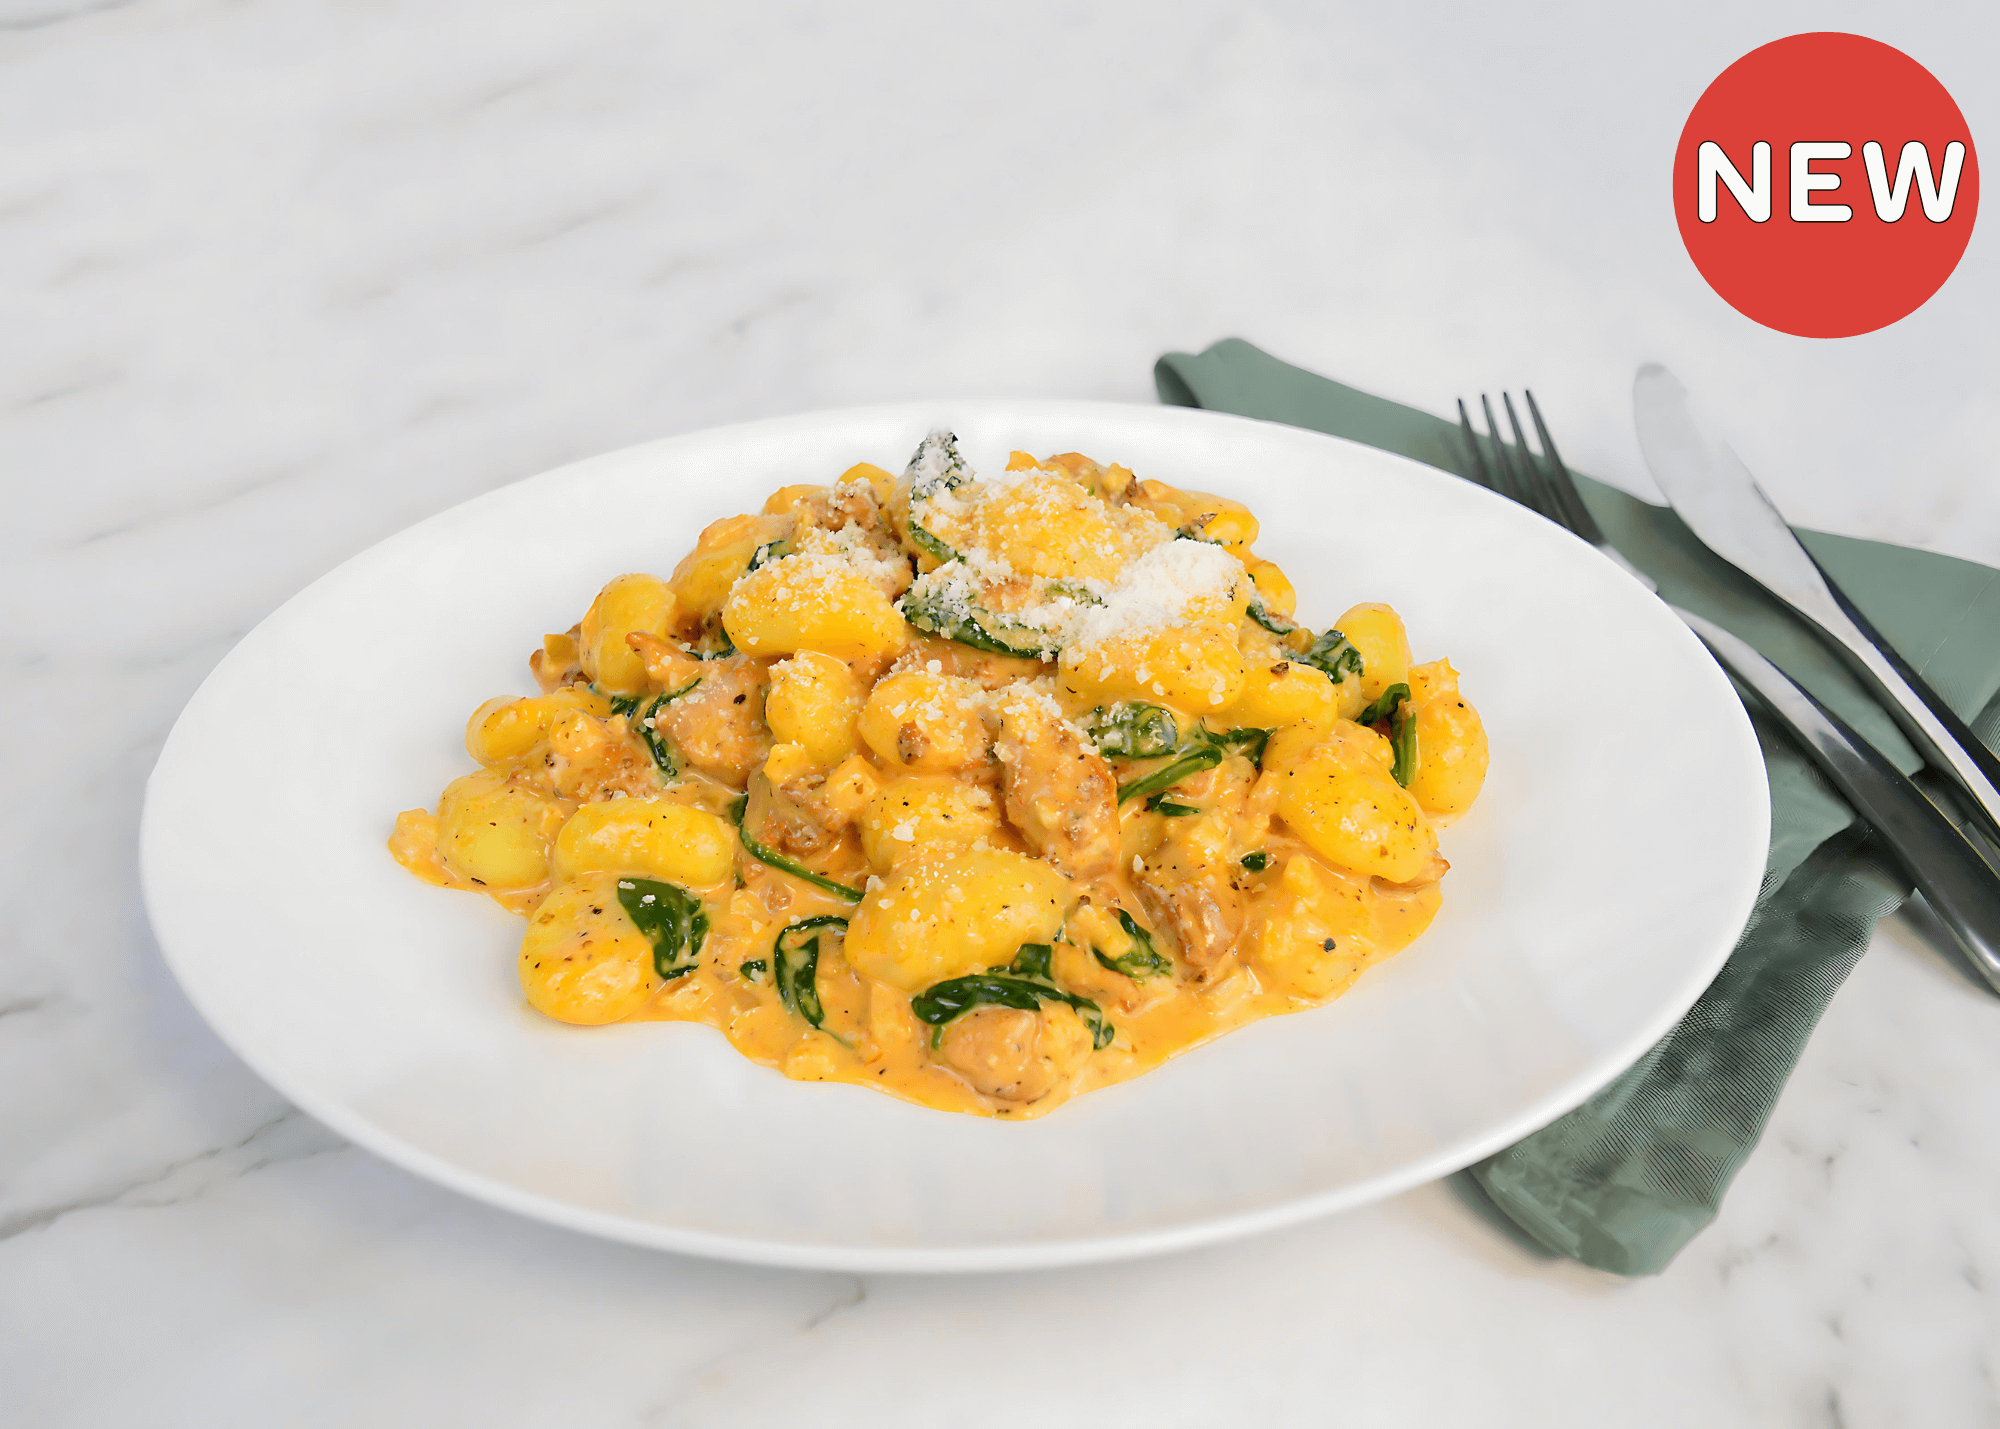 Chicken and Gnocchi Meal Kit